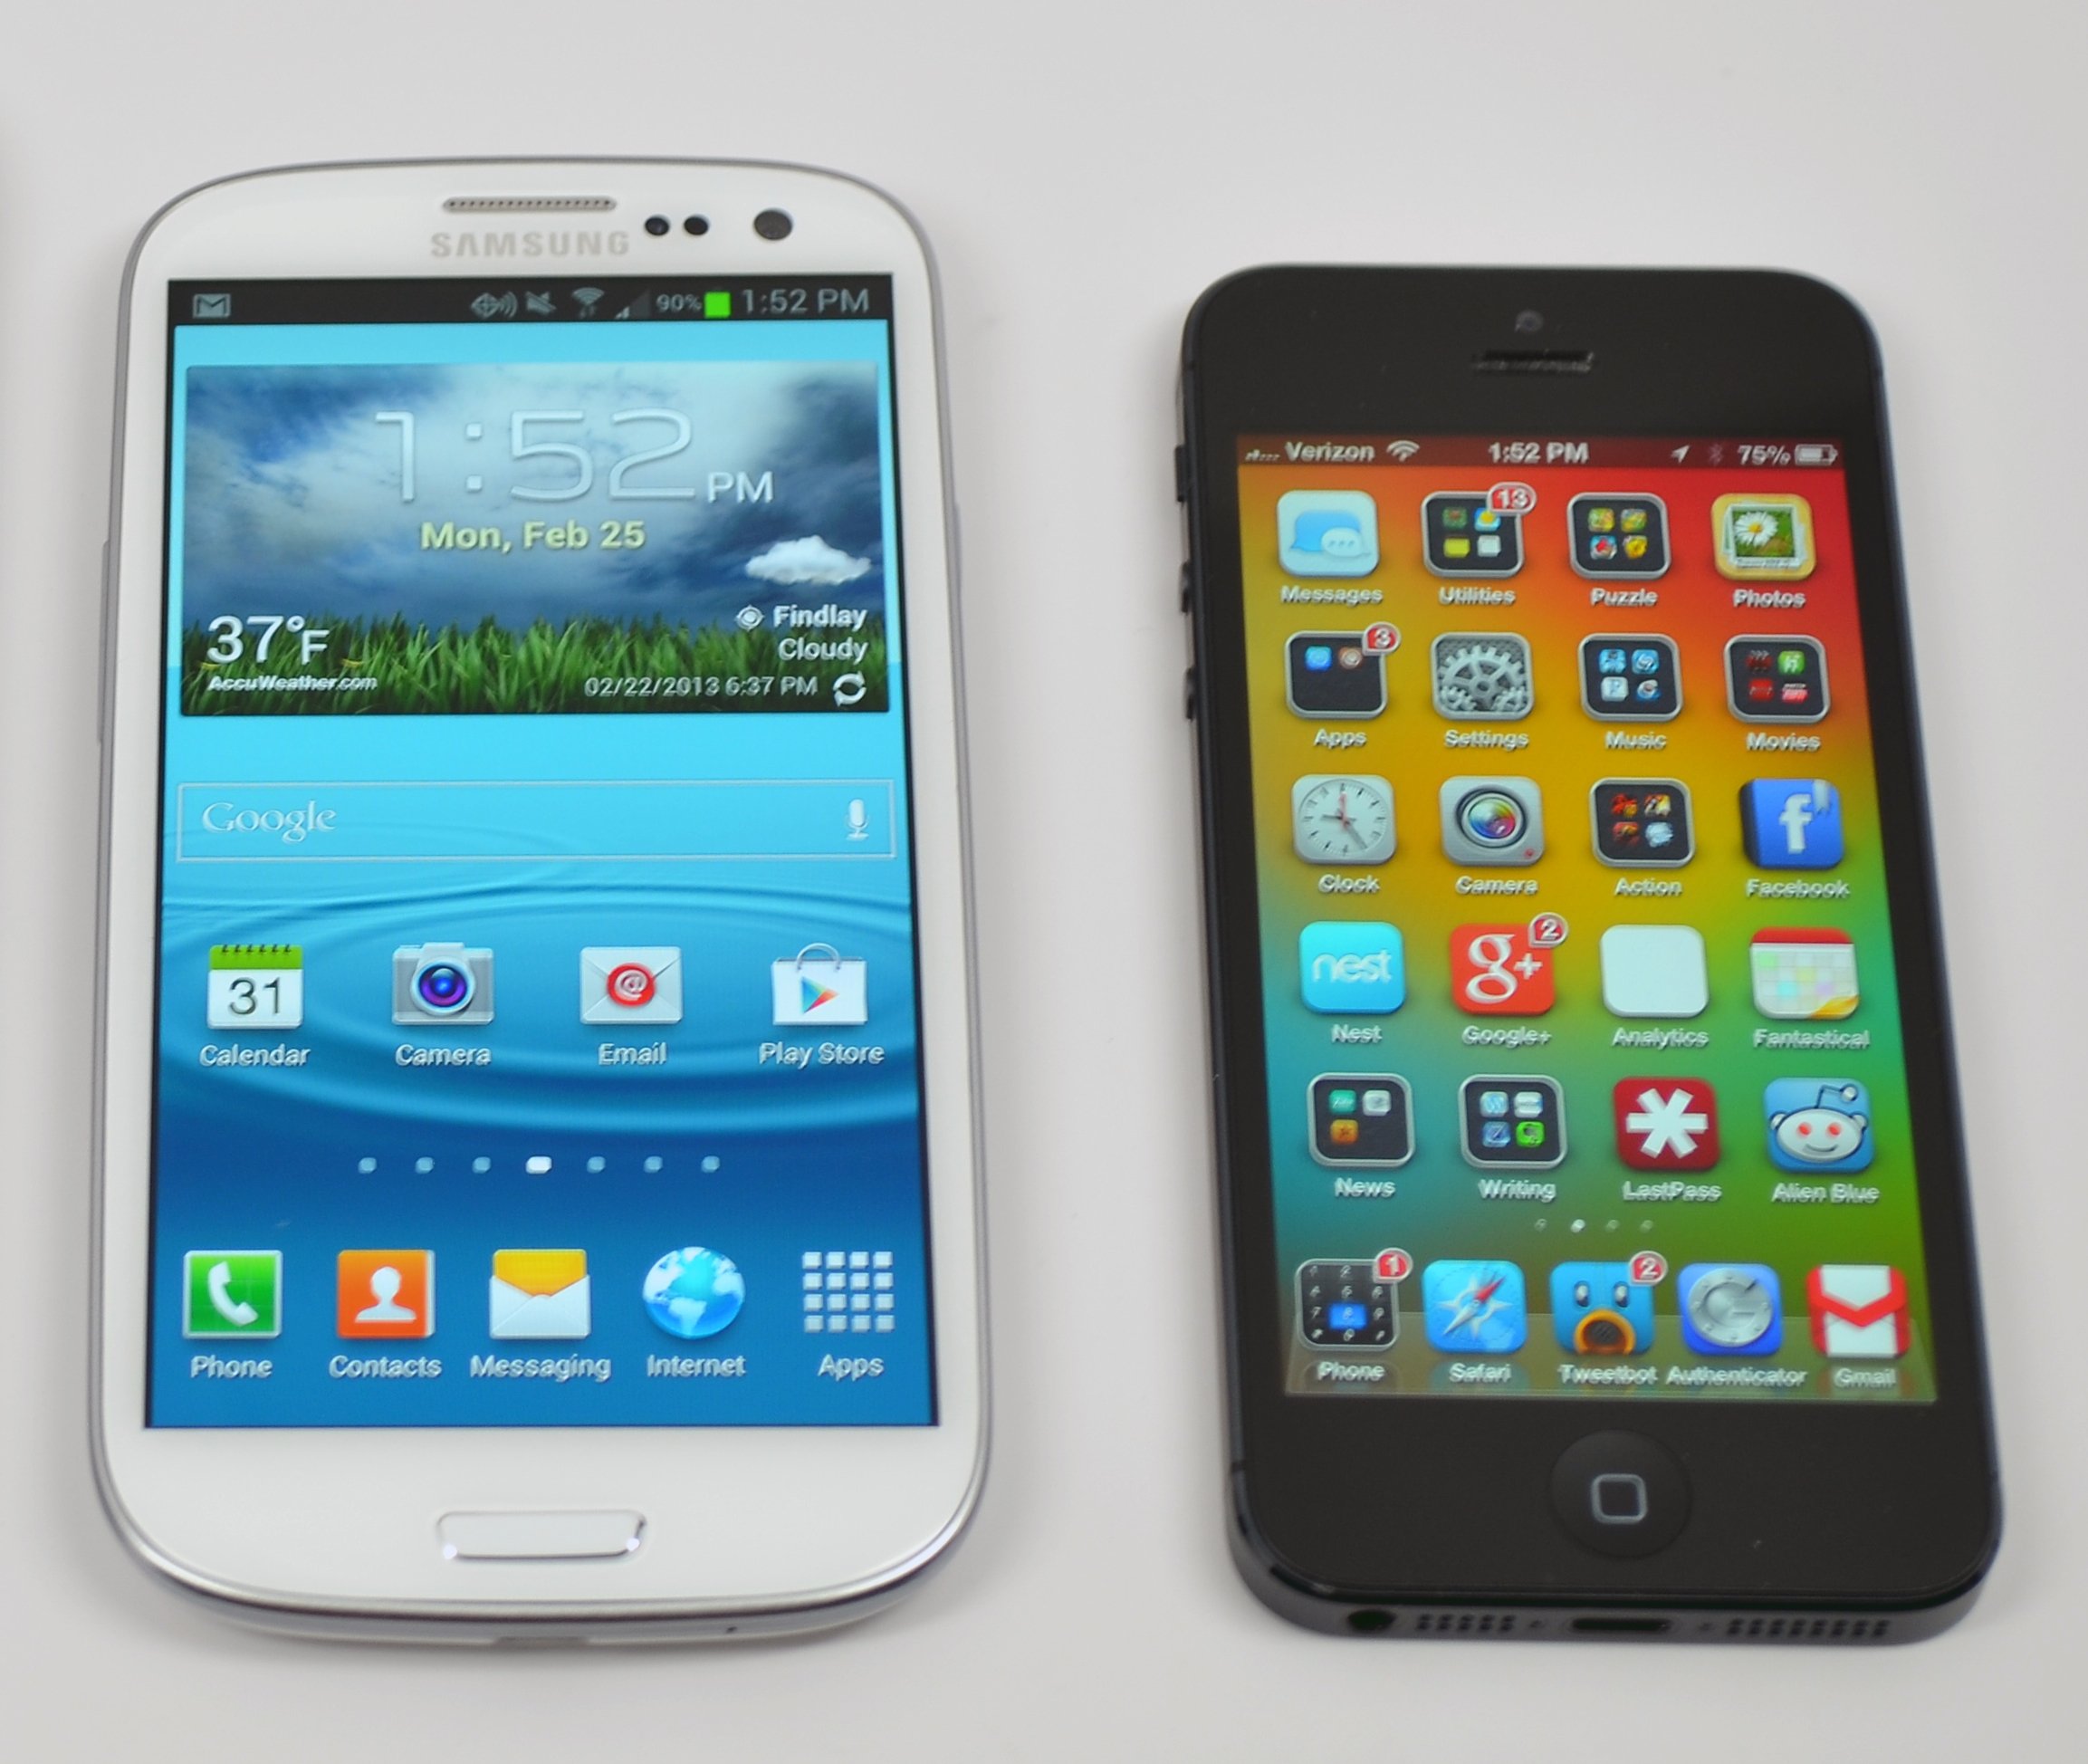 A new investor note claims Apple is set on a 4.8-inch display, the same size as the Galaxy S3.